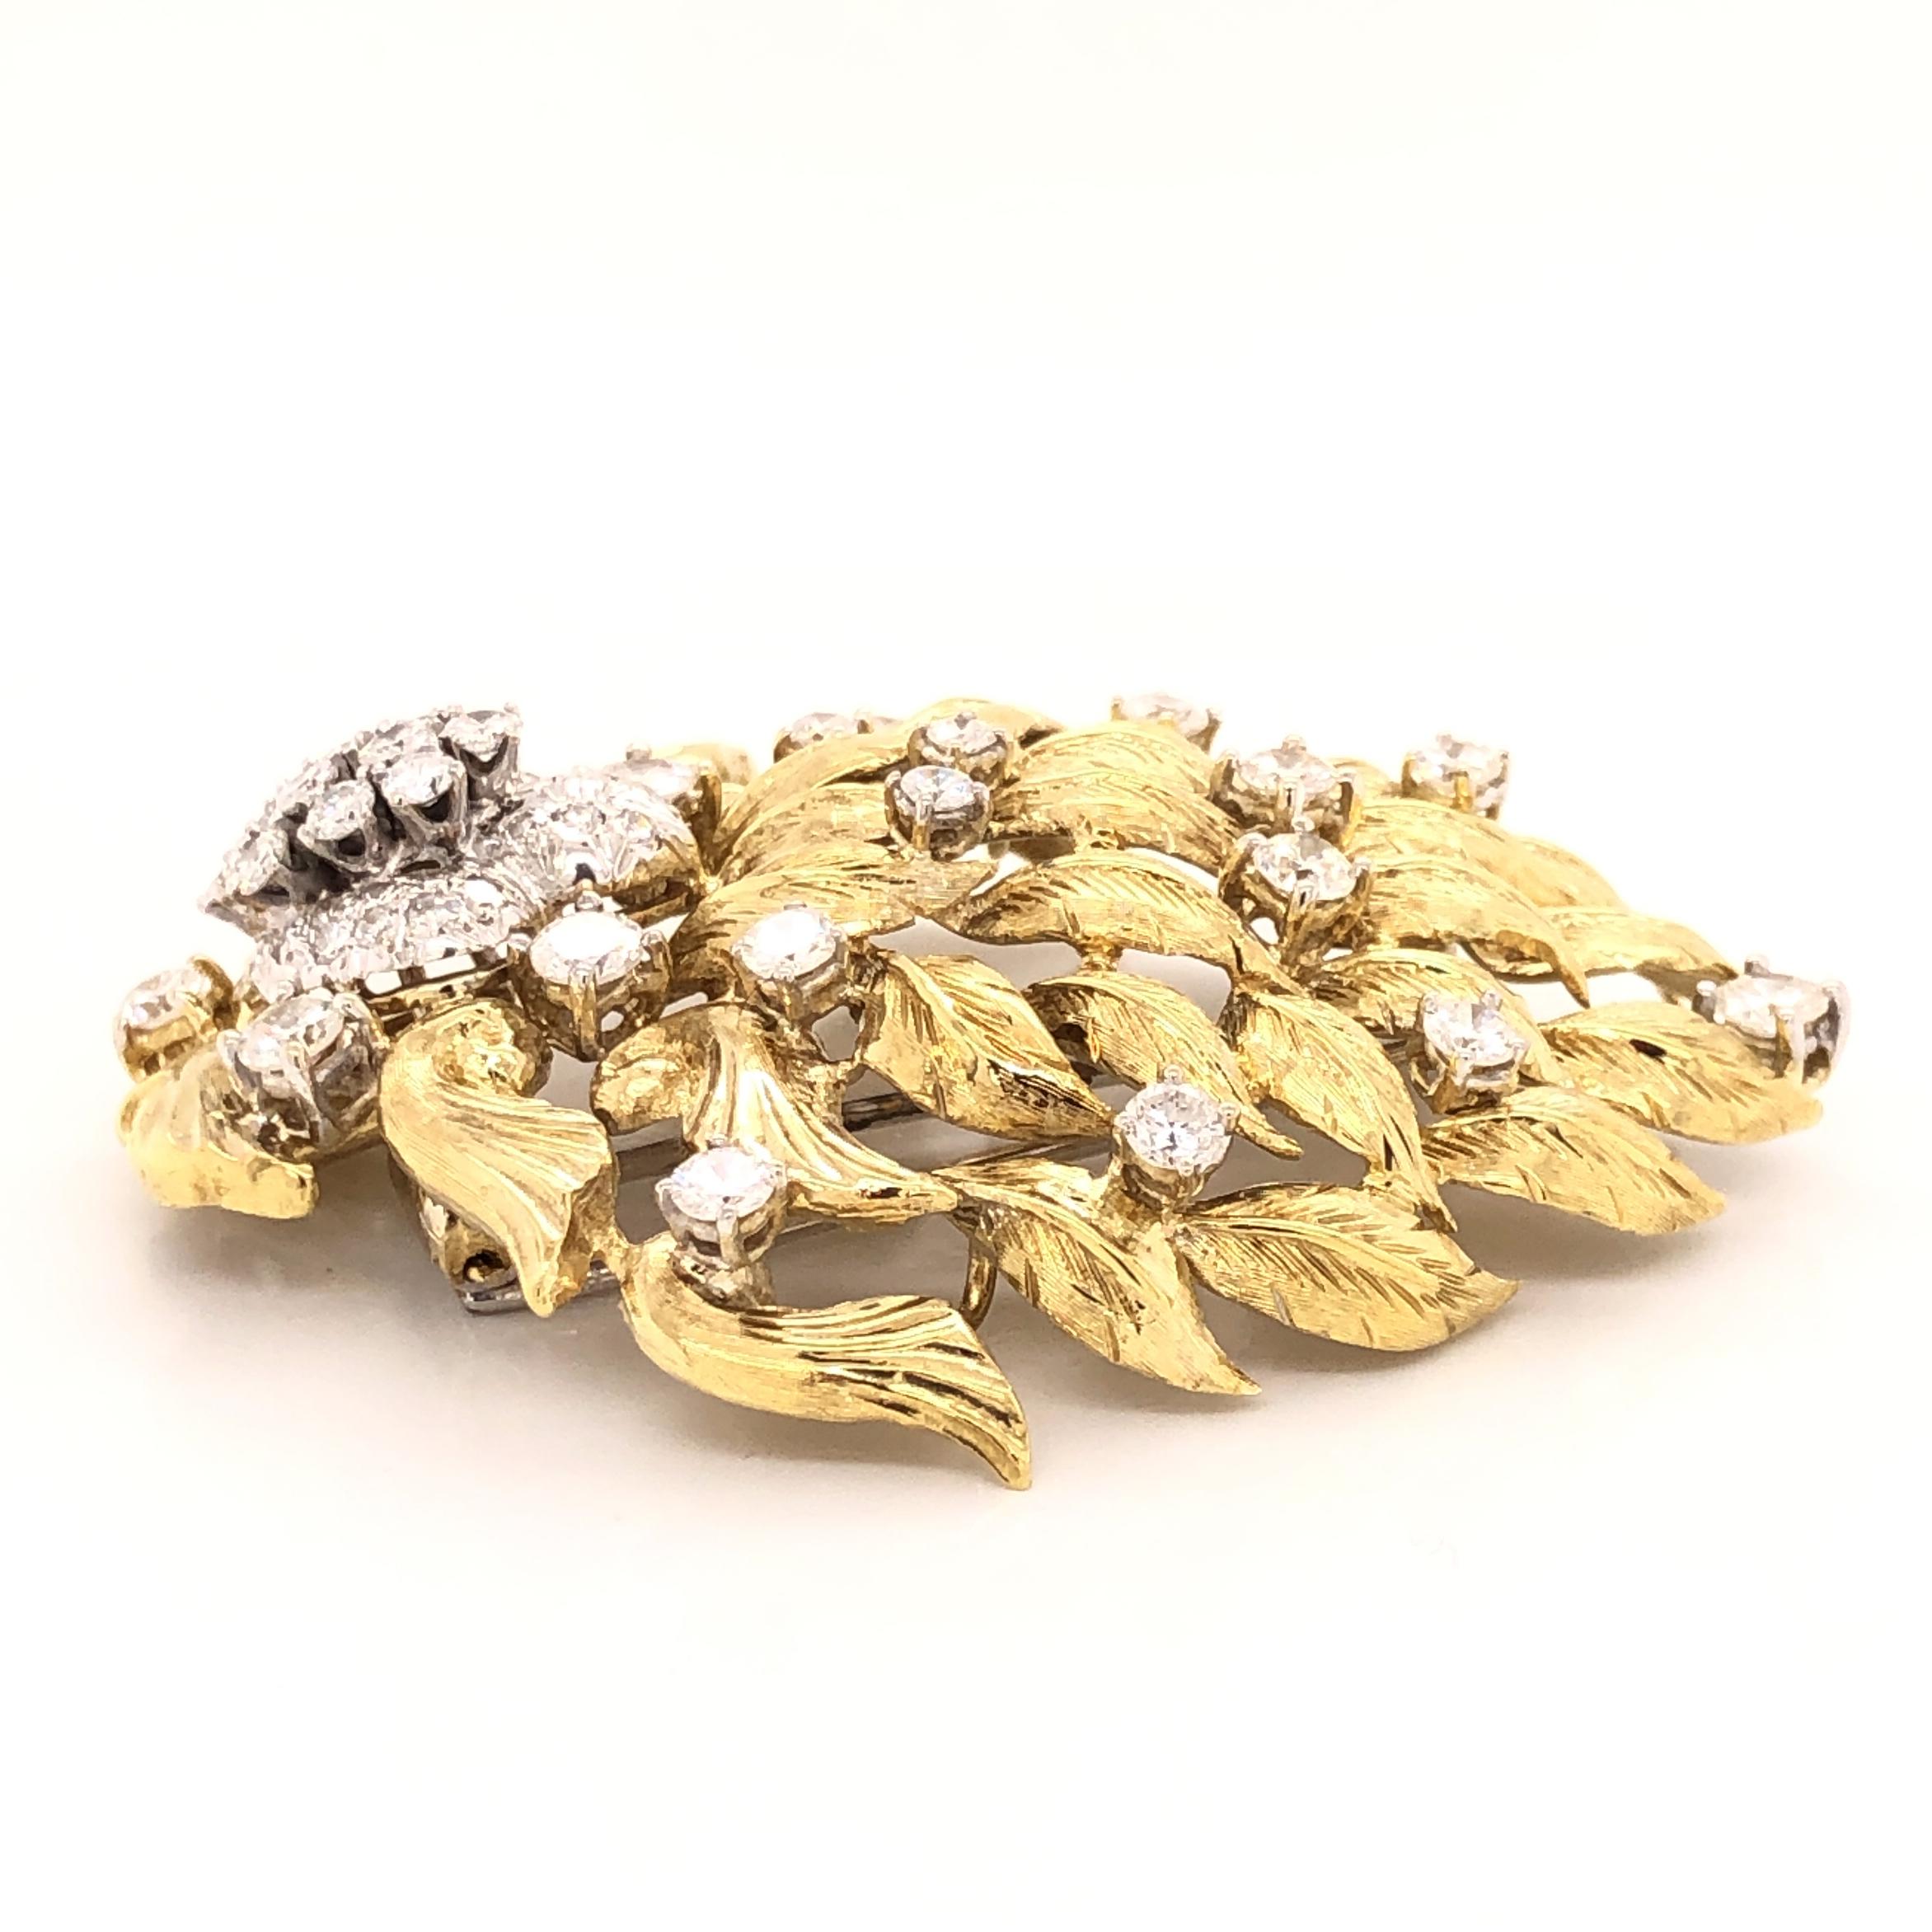 Round Cut Large Diamond Flower and Gold Leaf Floral Brooch Pendant Pin